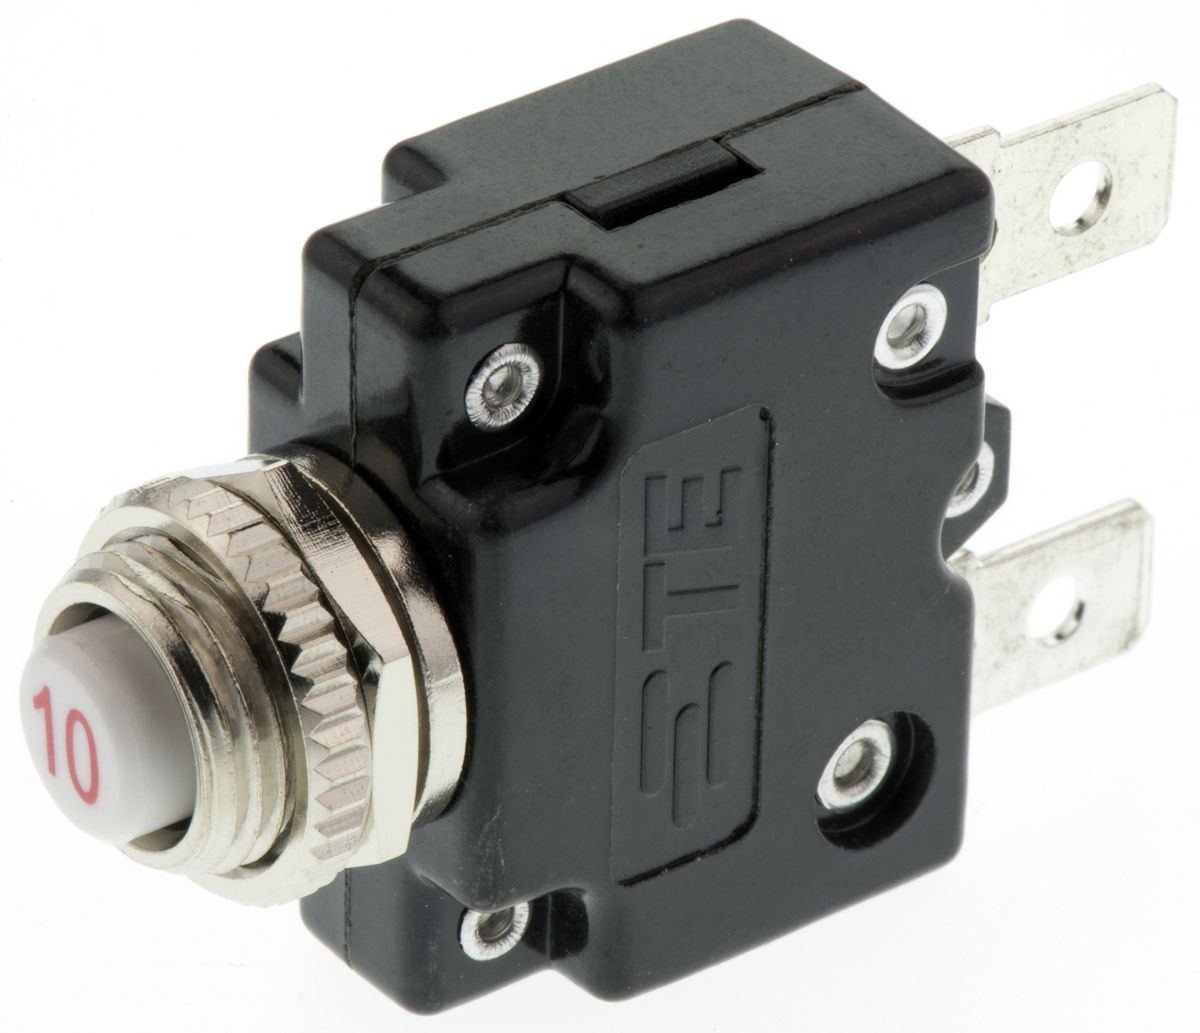 TE Connectivity W57 Single Pole Thermal Circuit Breaker - 250V ac Voltage Rating, 10A Current Rating